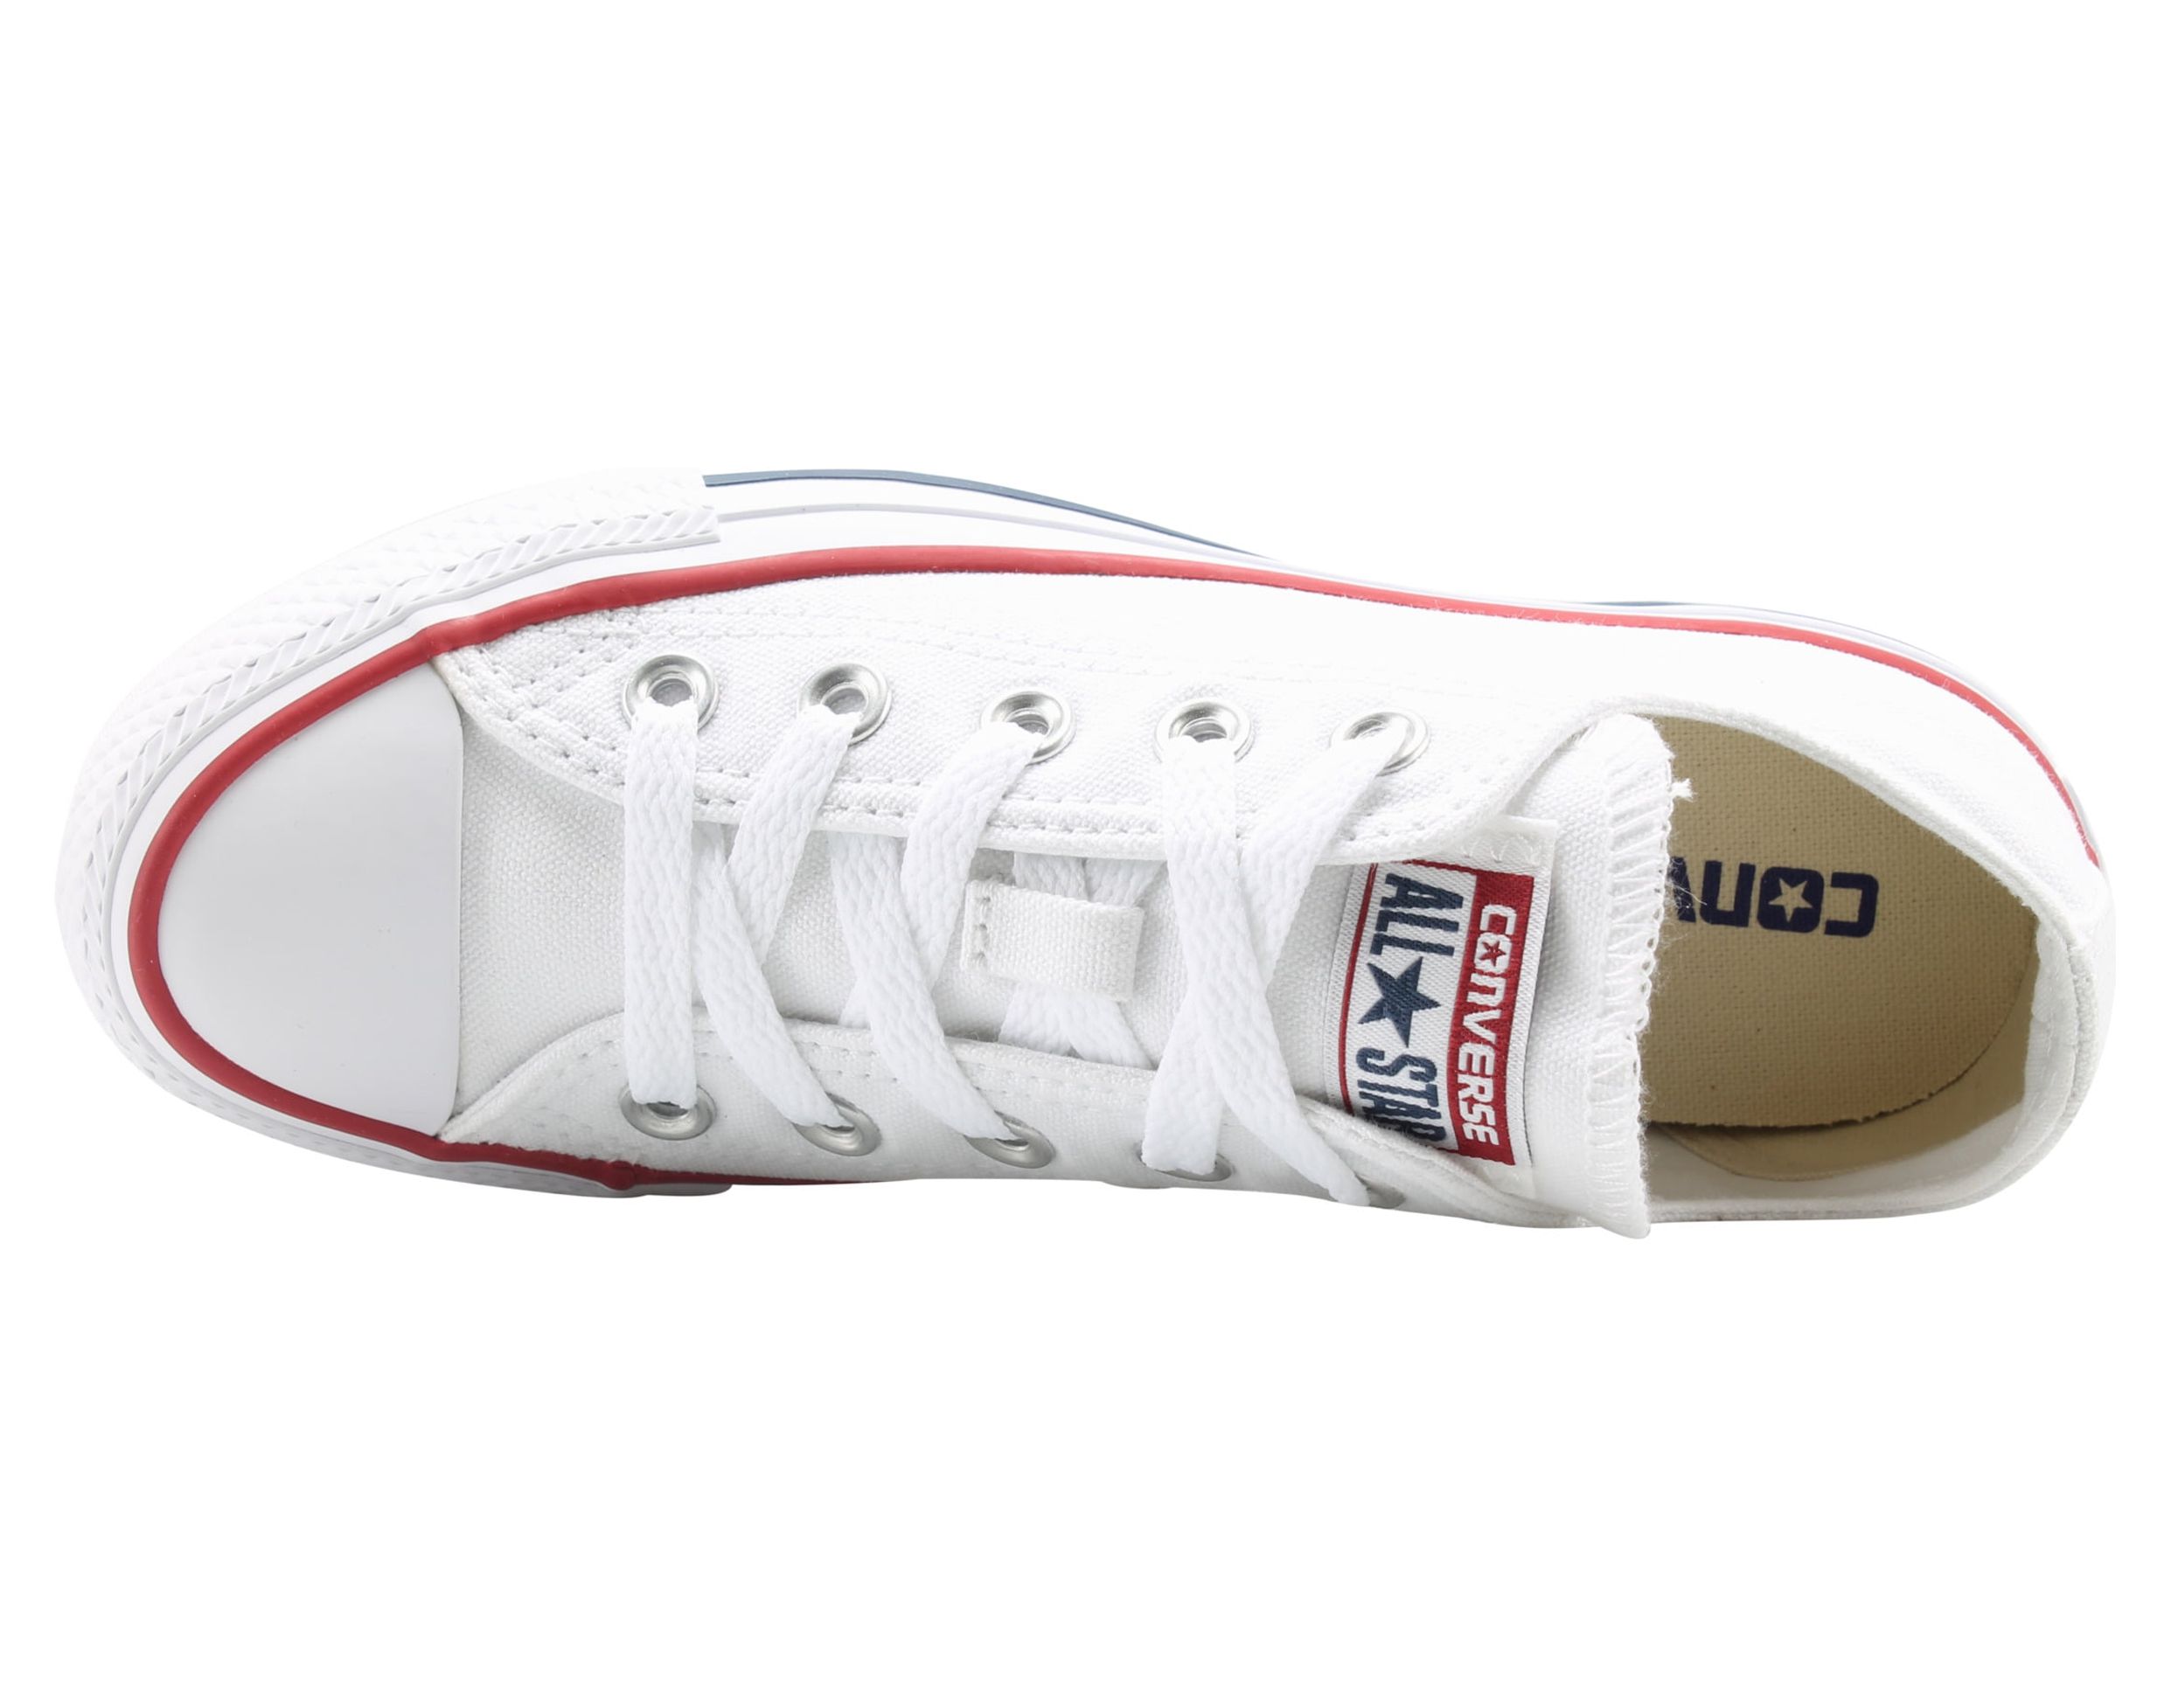 Converse M7652 / M7652C Chuck Taylor All Star Low Top Canvas Optical White - image 4 of 6